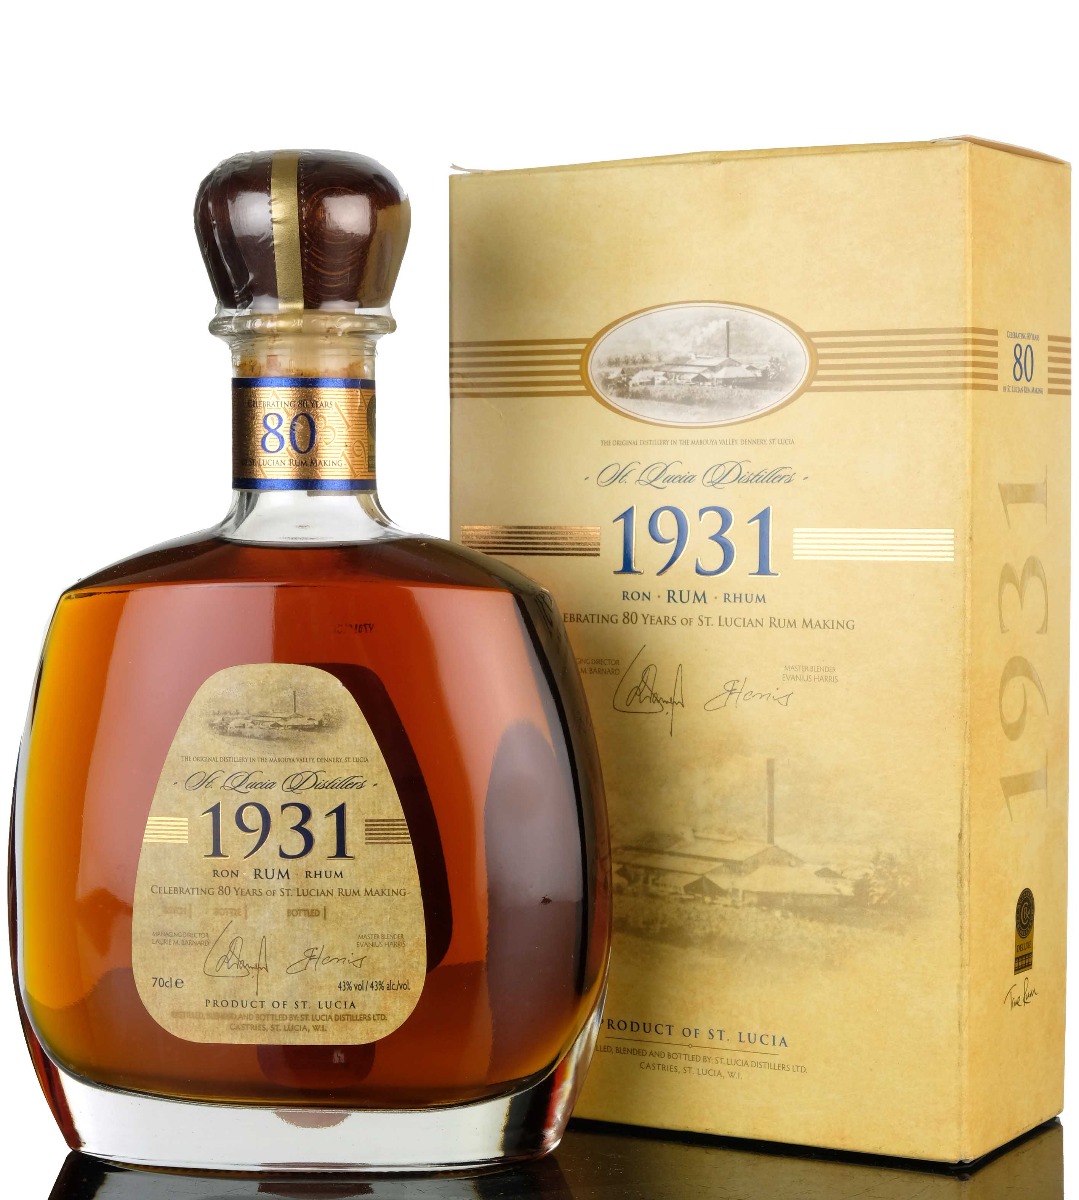 St Lucia Distillers 1931 Rum - Celebrating 80 Years - Batch 1 - 2011 Release